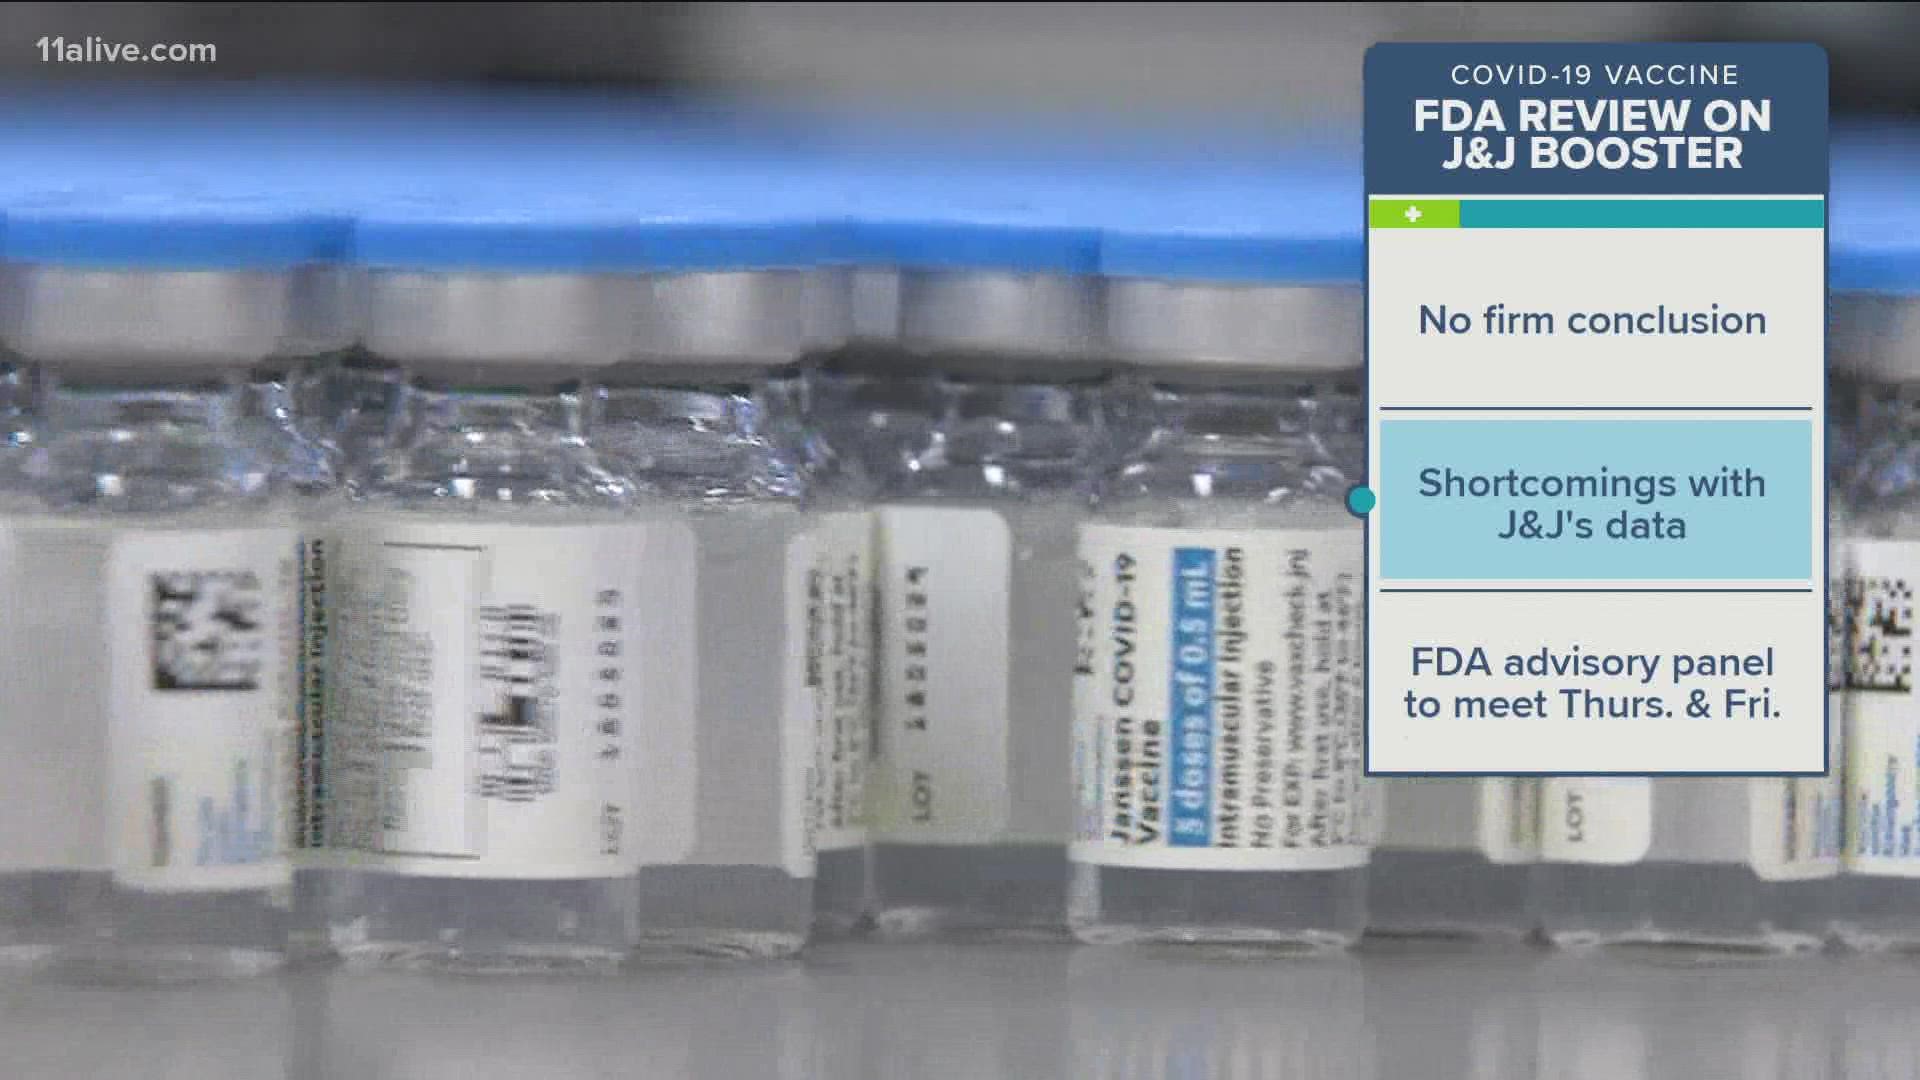 The review comes ahead of meetings Thursday and Friday when an FDA advisory panel will recommend whether or not to back booster doses of the J&J and Moderna vaccines